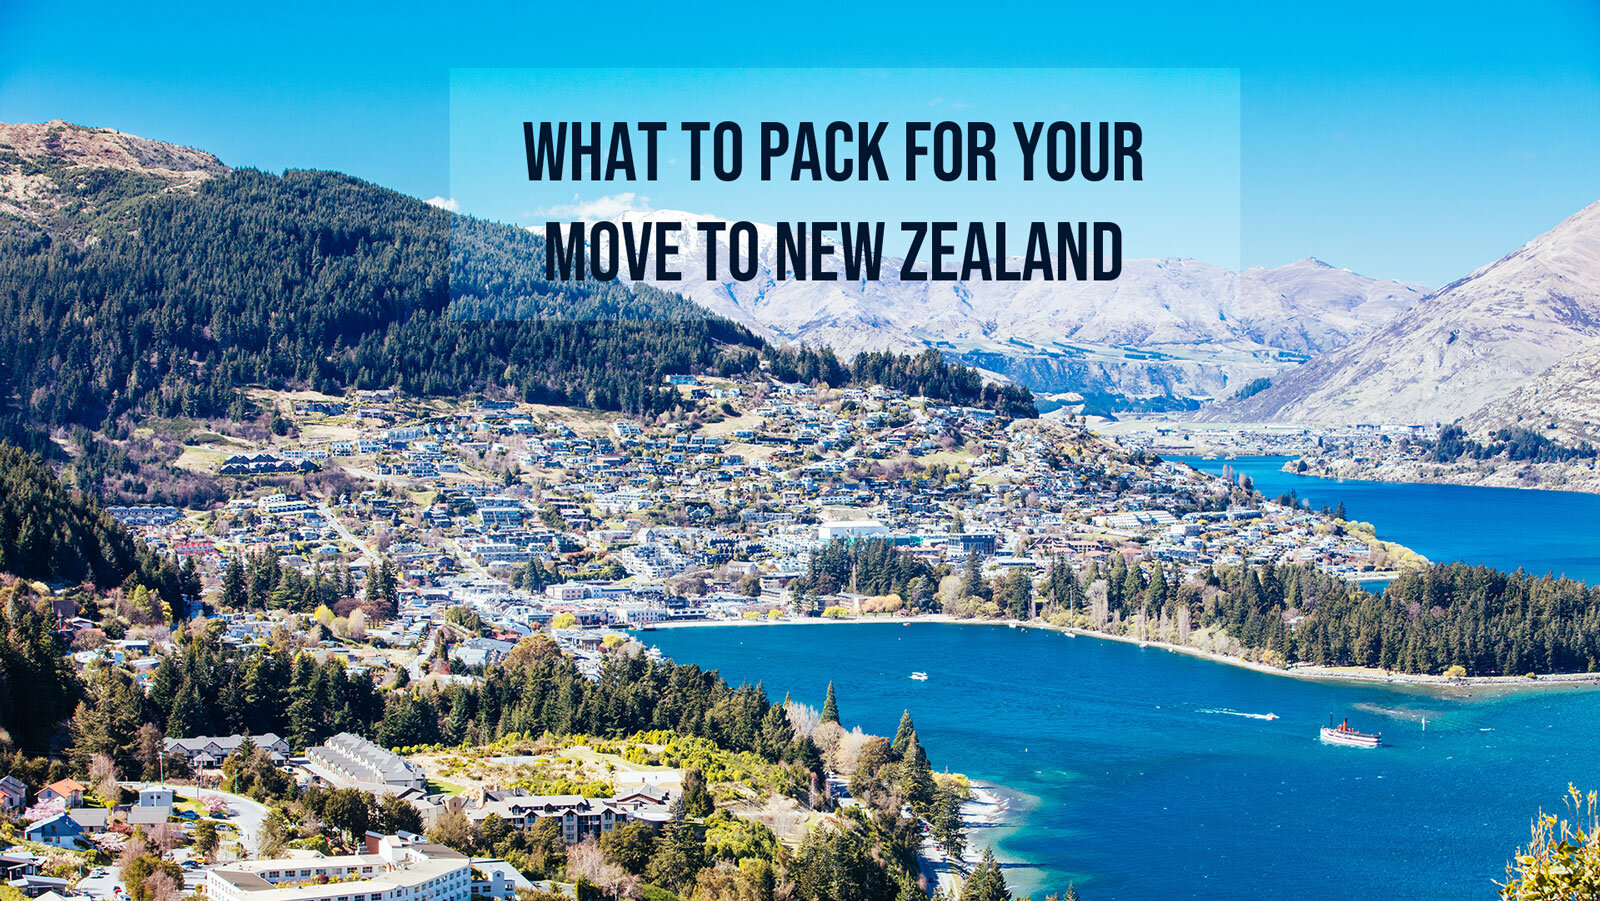 How to Pack for your move from the US to New Zealand